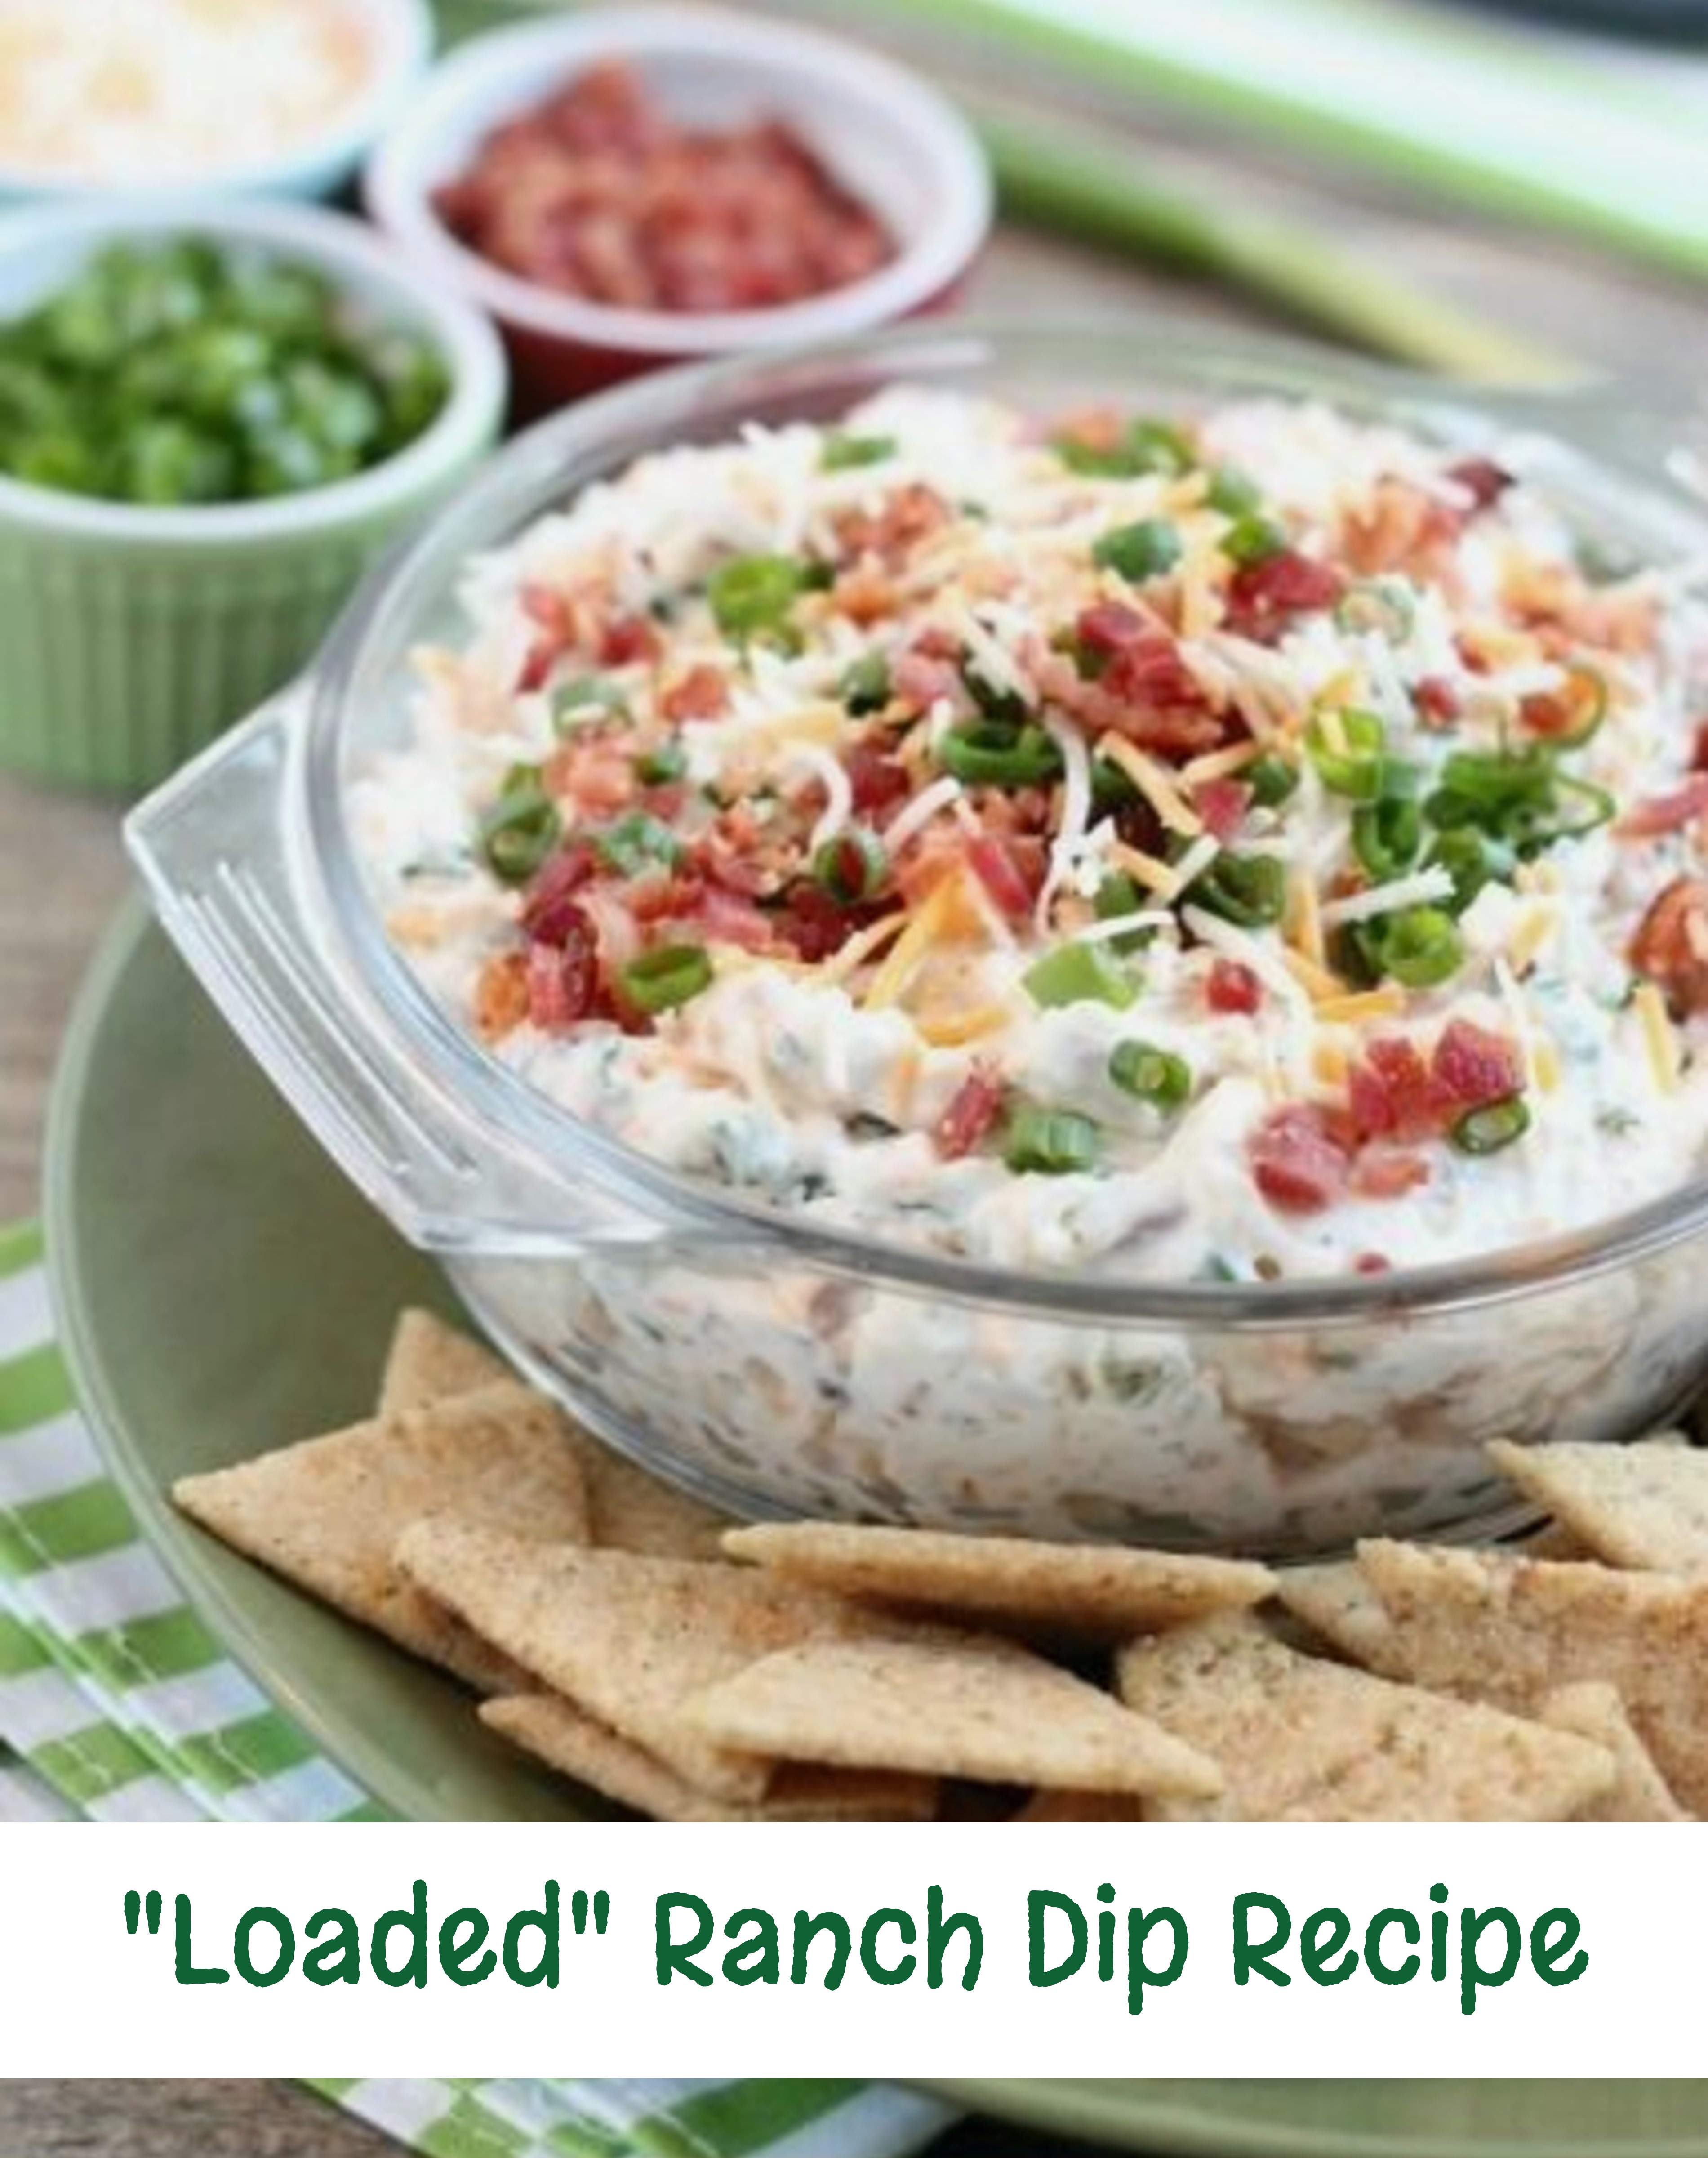 Loaded Ranch Dip Recipe and lots more EASY Ranch Dip Recipes on this page. My favorite cold ranch dip recipes for veggies and chip that are all super easy to make and insanely good crowd pleasing recipes. They are truly the perfect party food!